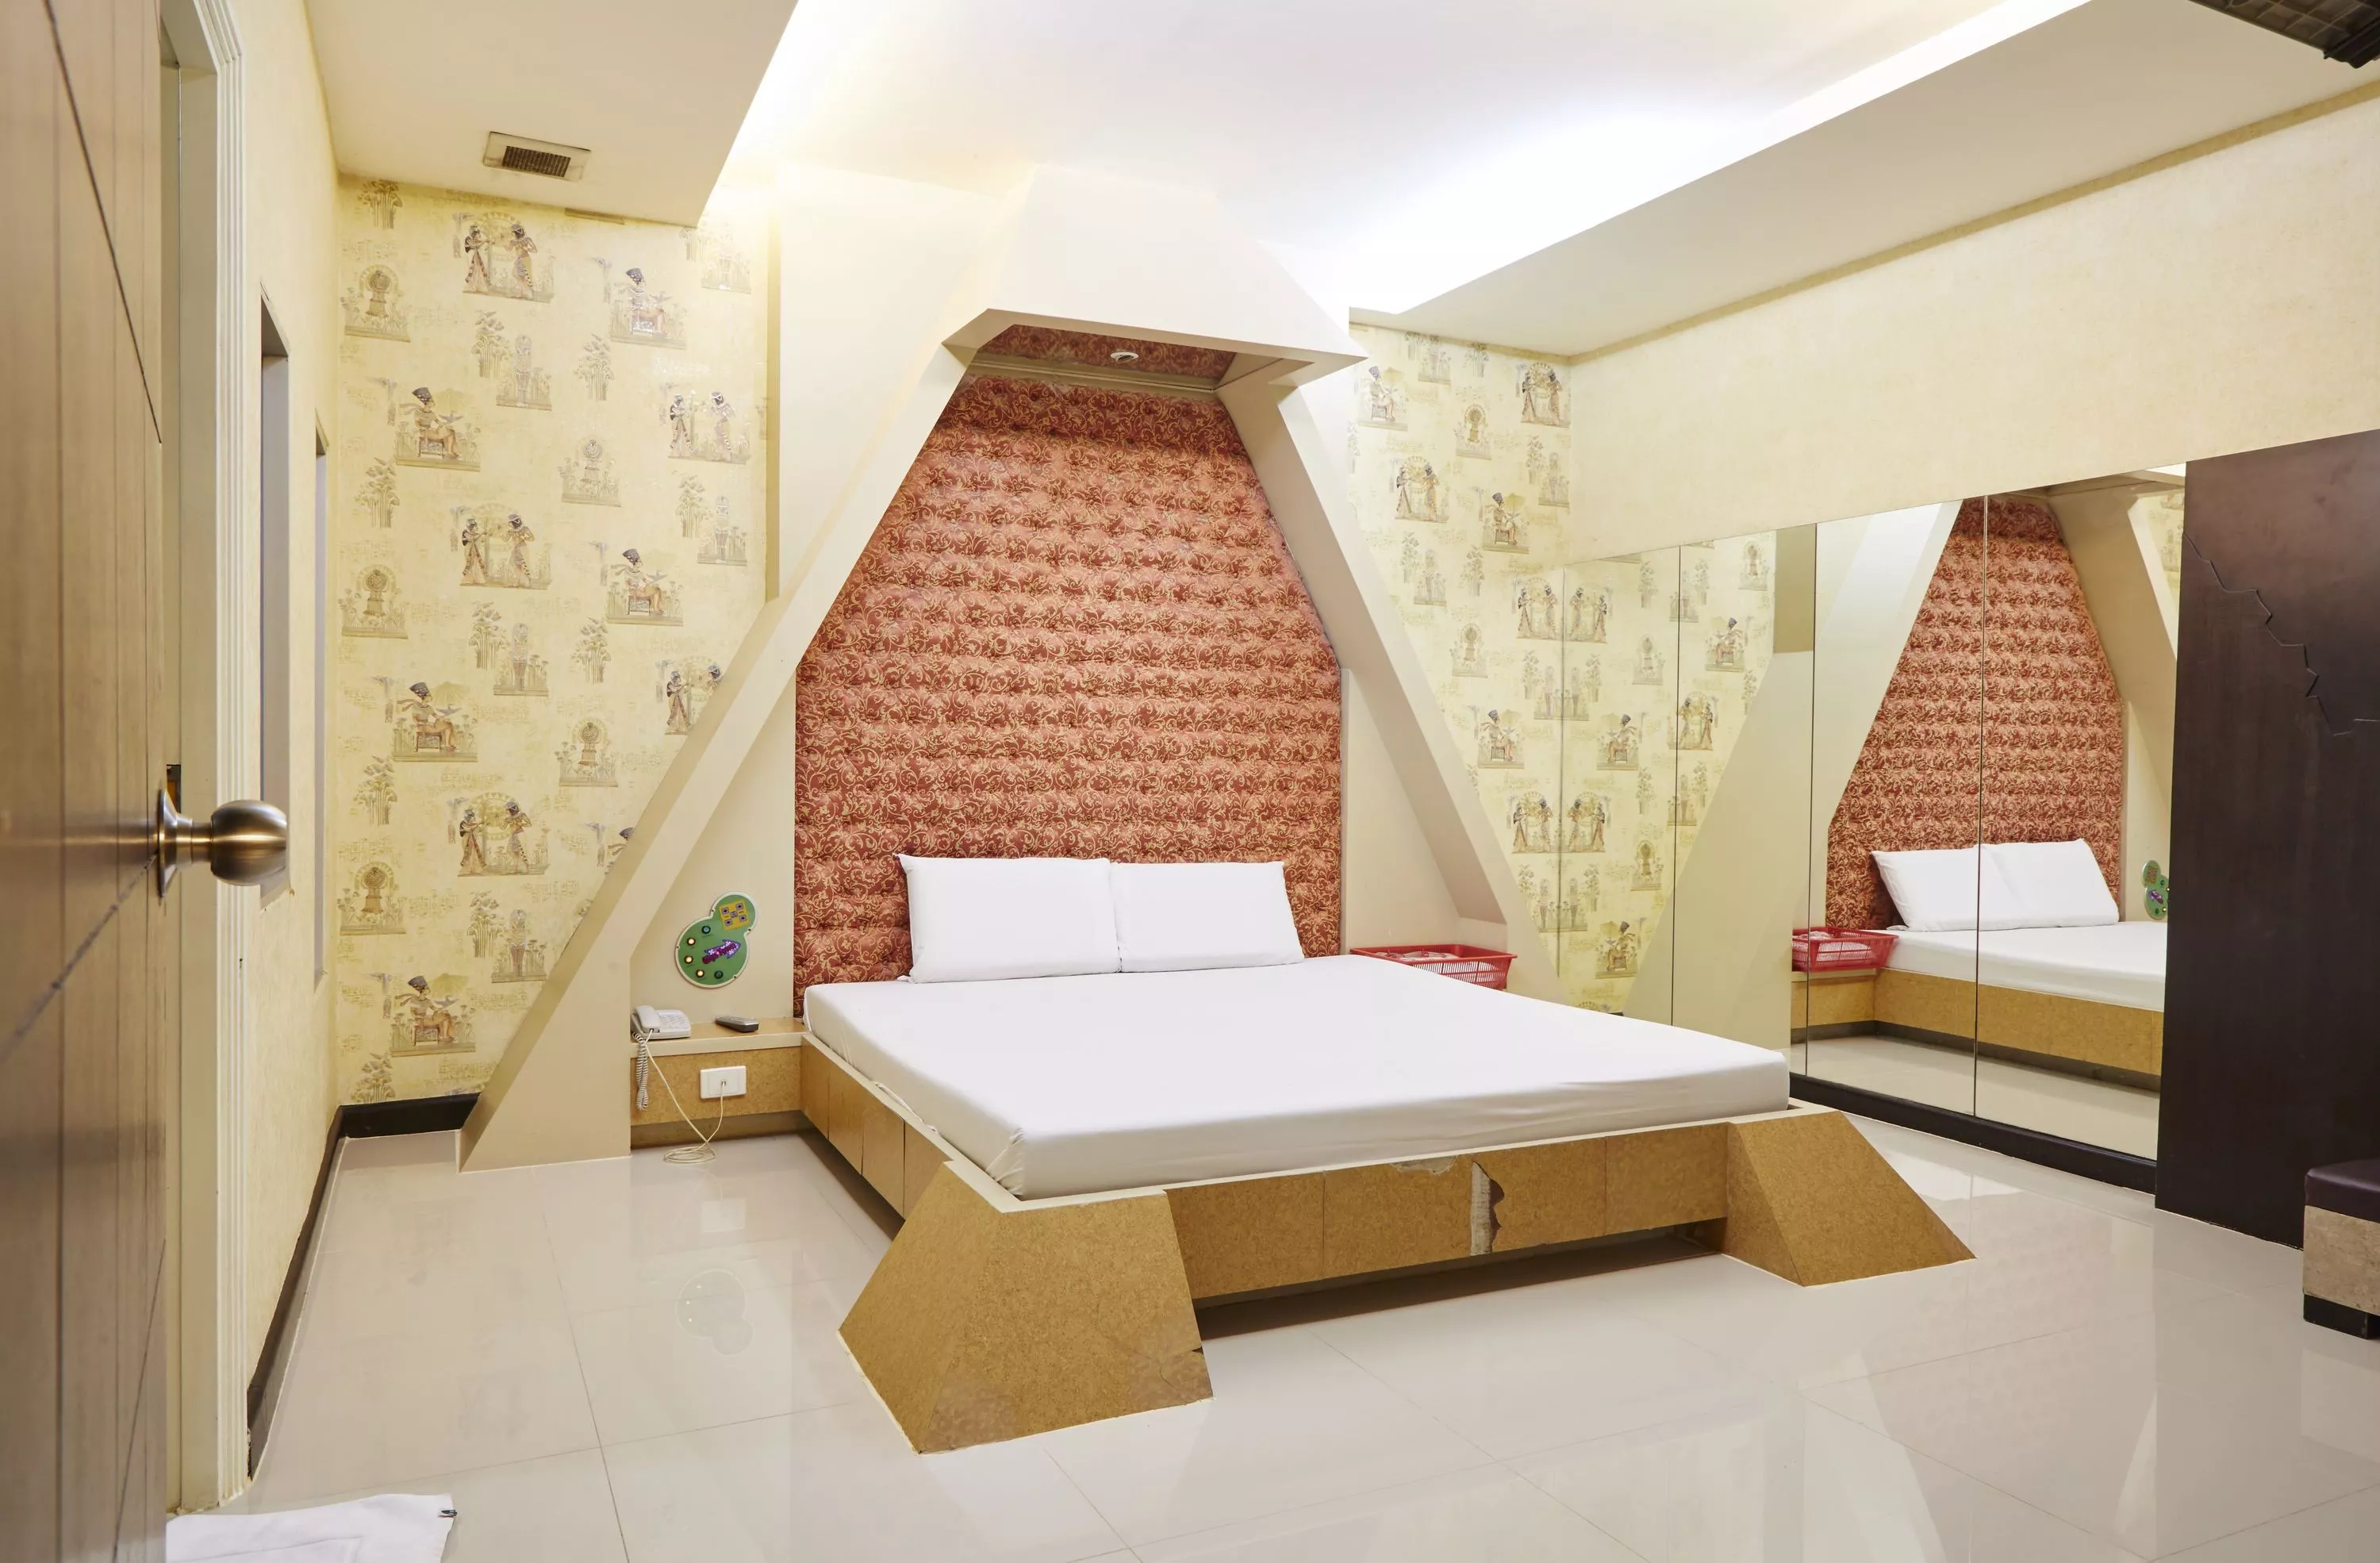 Gigs Town Hotel in Thailand, Central Asia | Sex Hotels,Sex-Friendly Places - Rated 0.6